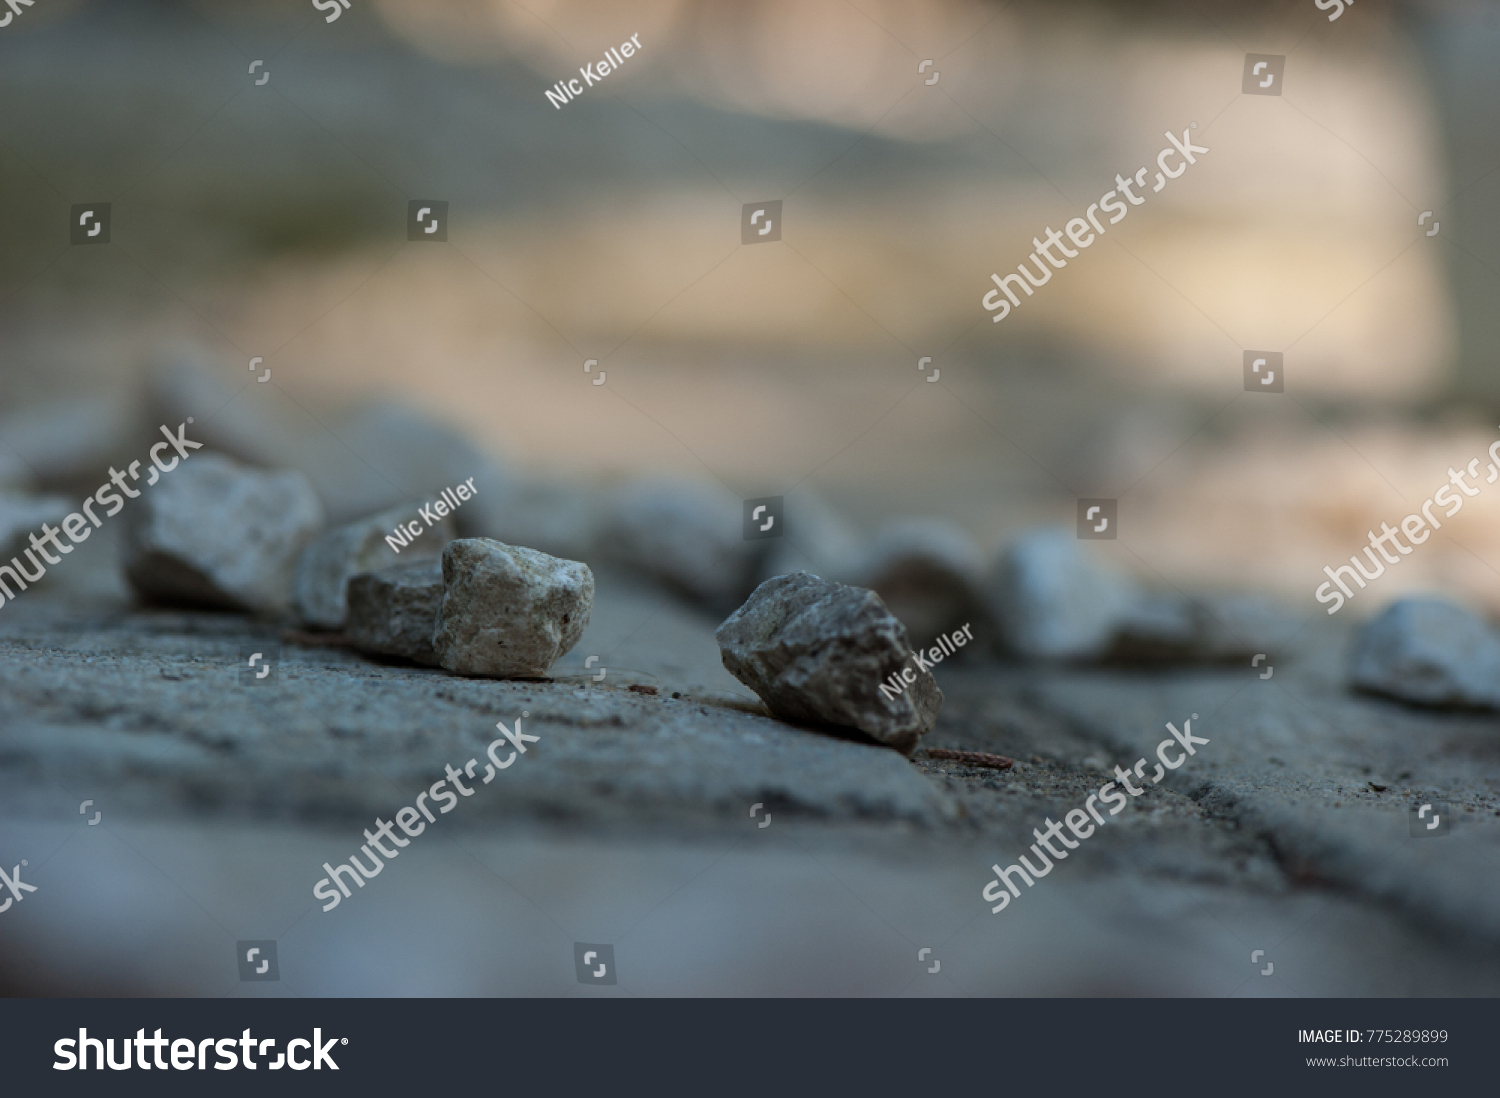 stones in the foreground and blur in the background, stones are light grey and the background grey and  orange colors, stones are in a group, the focus is on two stones and the others are blur  #775289899